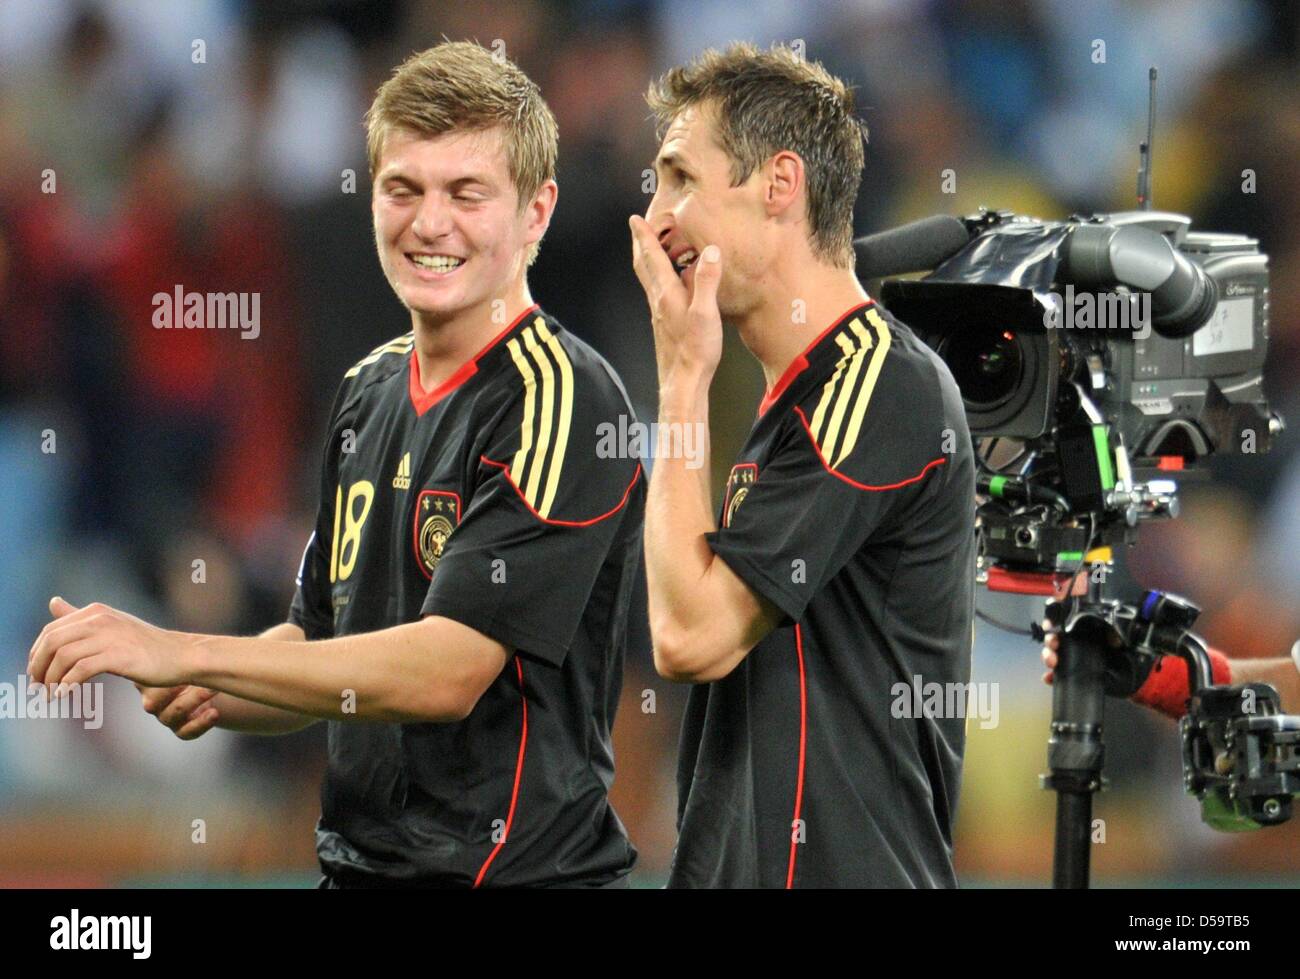 Toni Kroos (L) and Miroslav Klose of Germany celebrate after the final whistle of the FIFA World Cup 2010 quarterfinal match between Argentina and Germany at the Green Point Stadium in Cape Town, South Africa 03 July 2010. Photo: Bernd Weissbrod dpa - Please refer to http://dpaq.de/FIFA-WM2010-TC  +++(c) dpa - Bildfunk+++ Stock Photo